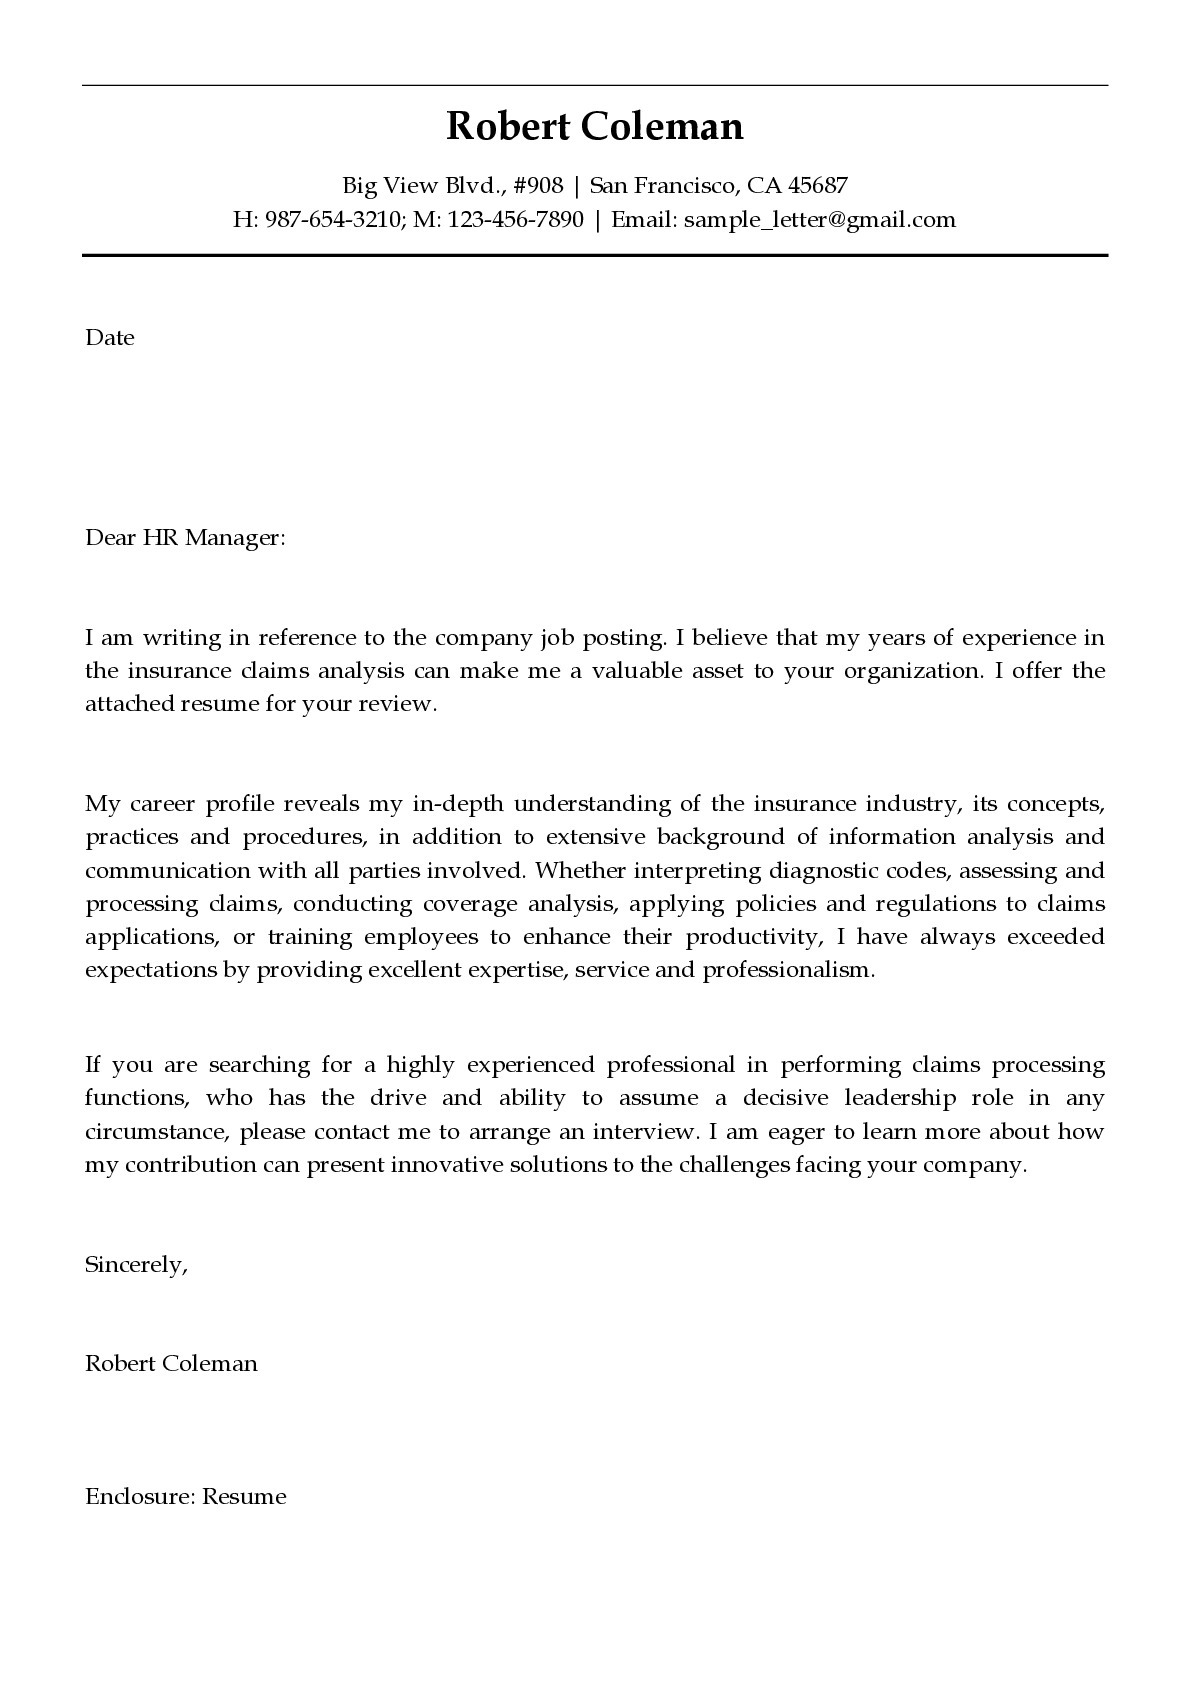 Senior Financial Analyst Cover Letter Sample Download for Free